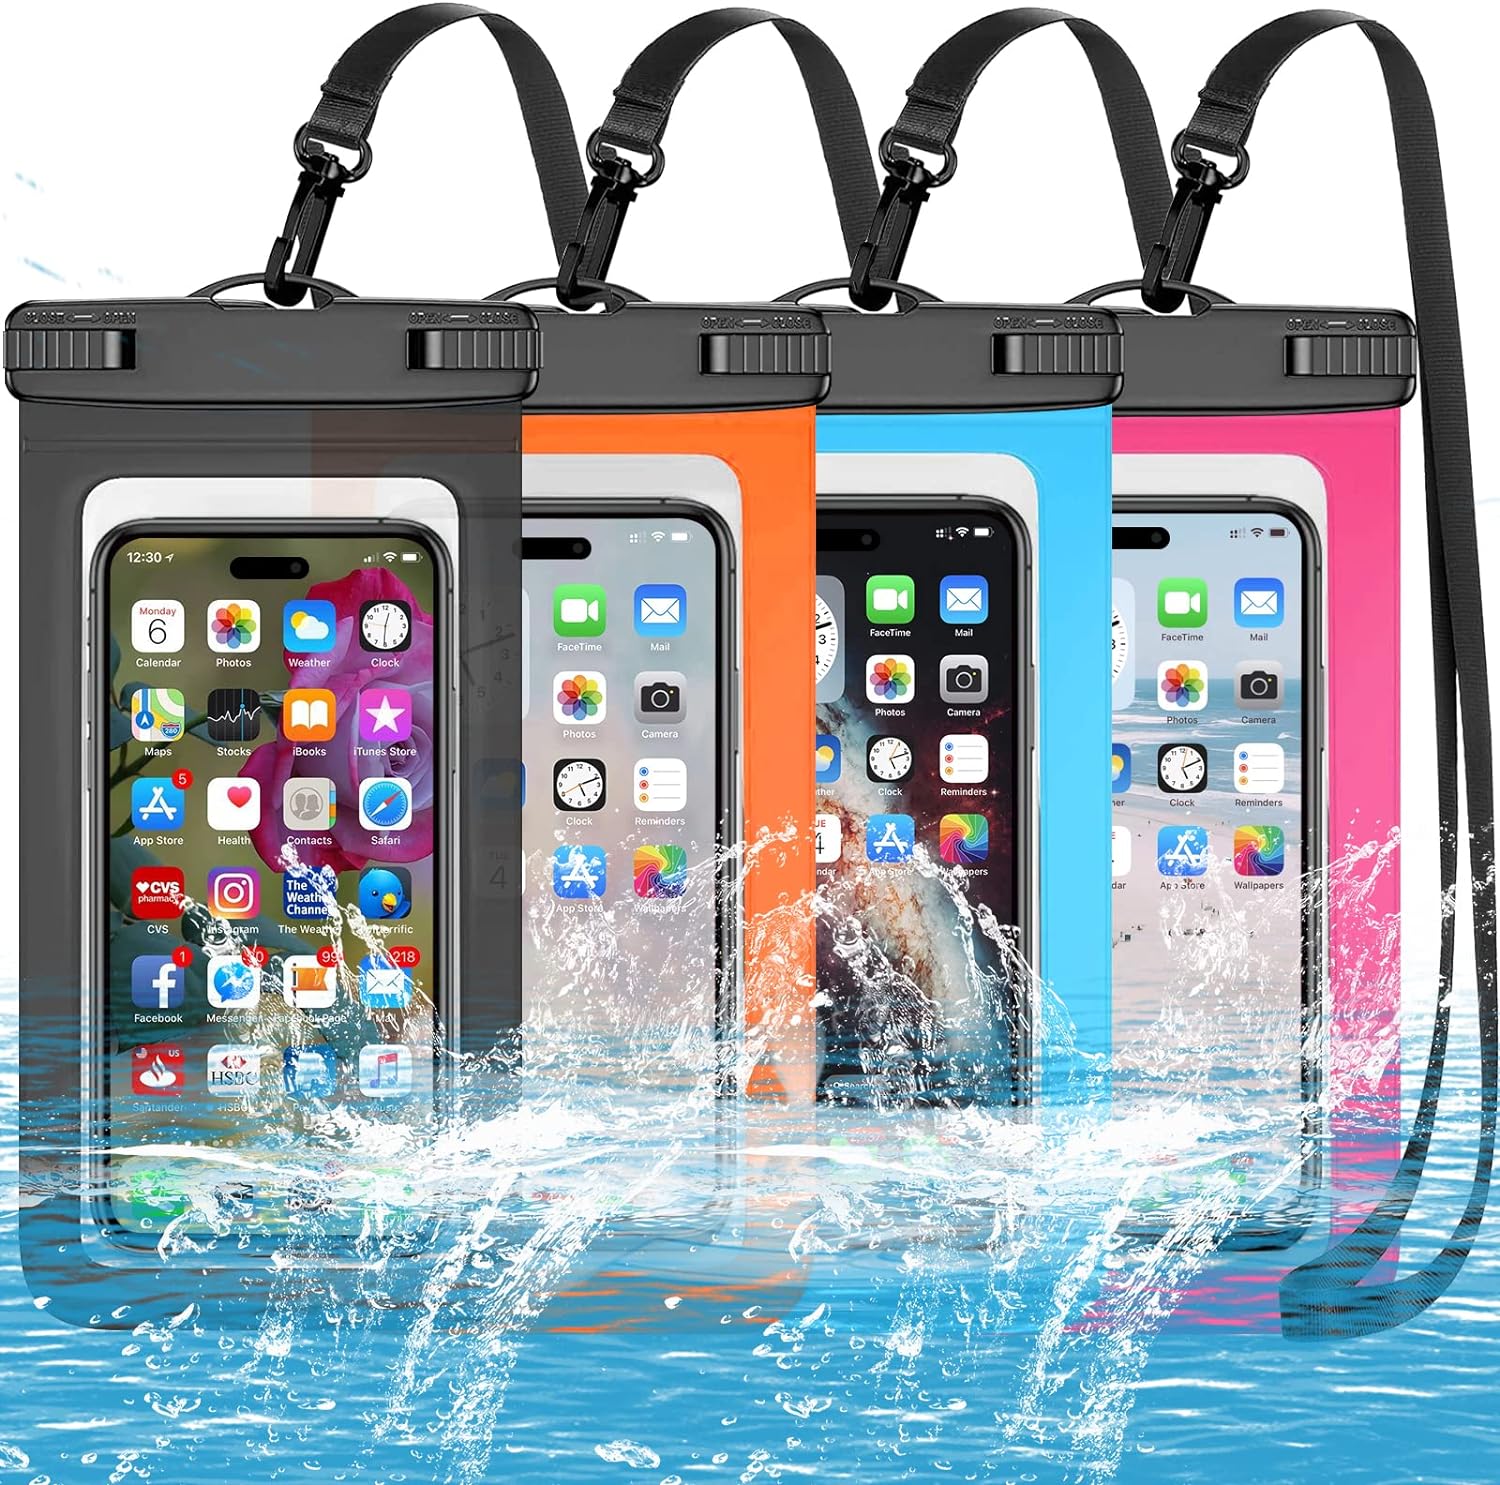 DXNONA 4 Pack Multicolor Universal Waterproof Case,Waterproof Phone Pouch Dry Bag for iPhone,Samsung Galaxy,Up to 7.5,IPX8 Cellphone Dry Bag,Boating,Swimming,Kayaking,Yachting